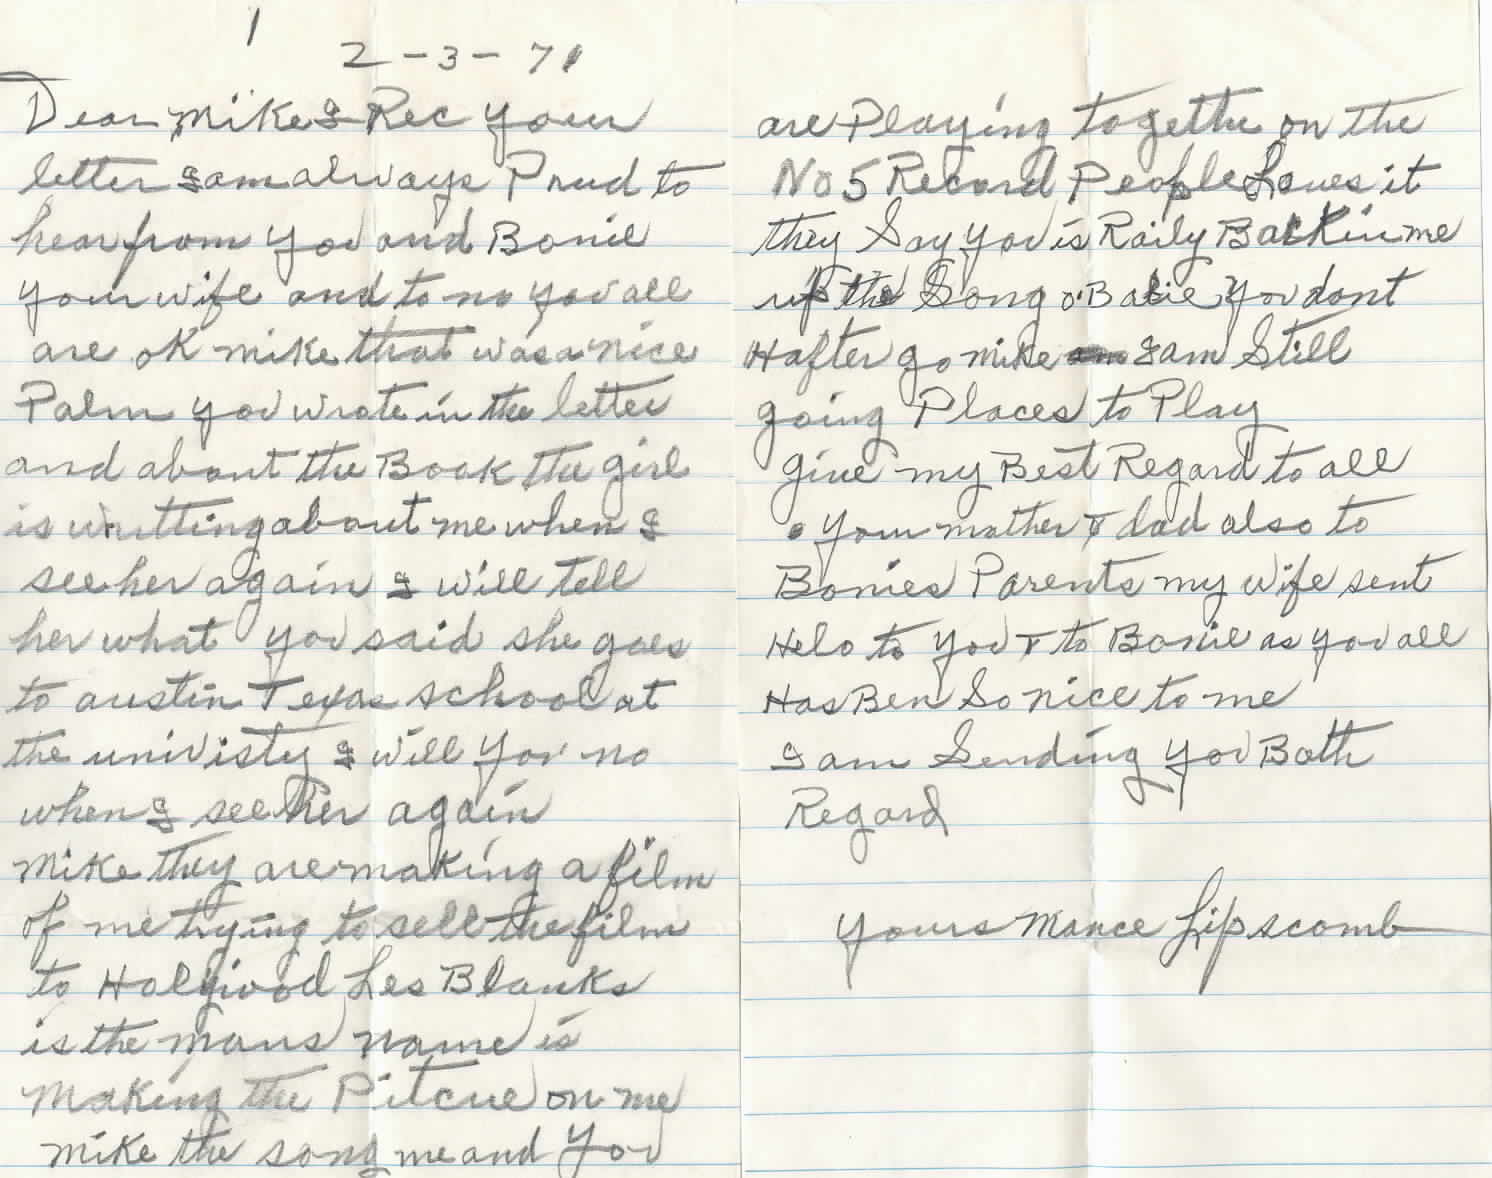 letter dated 2-3-71